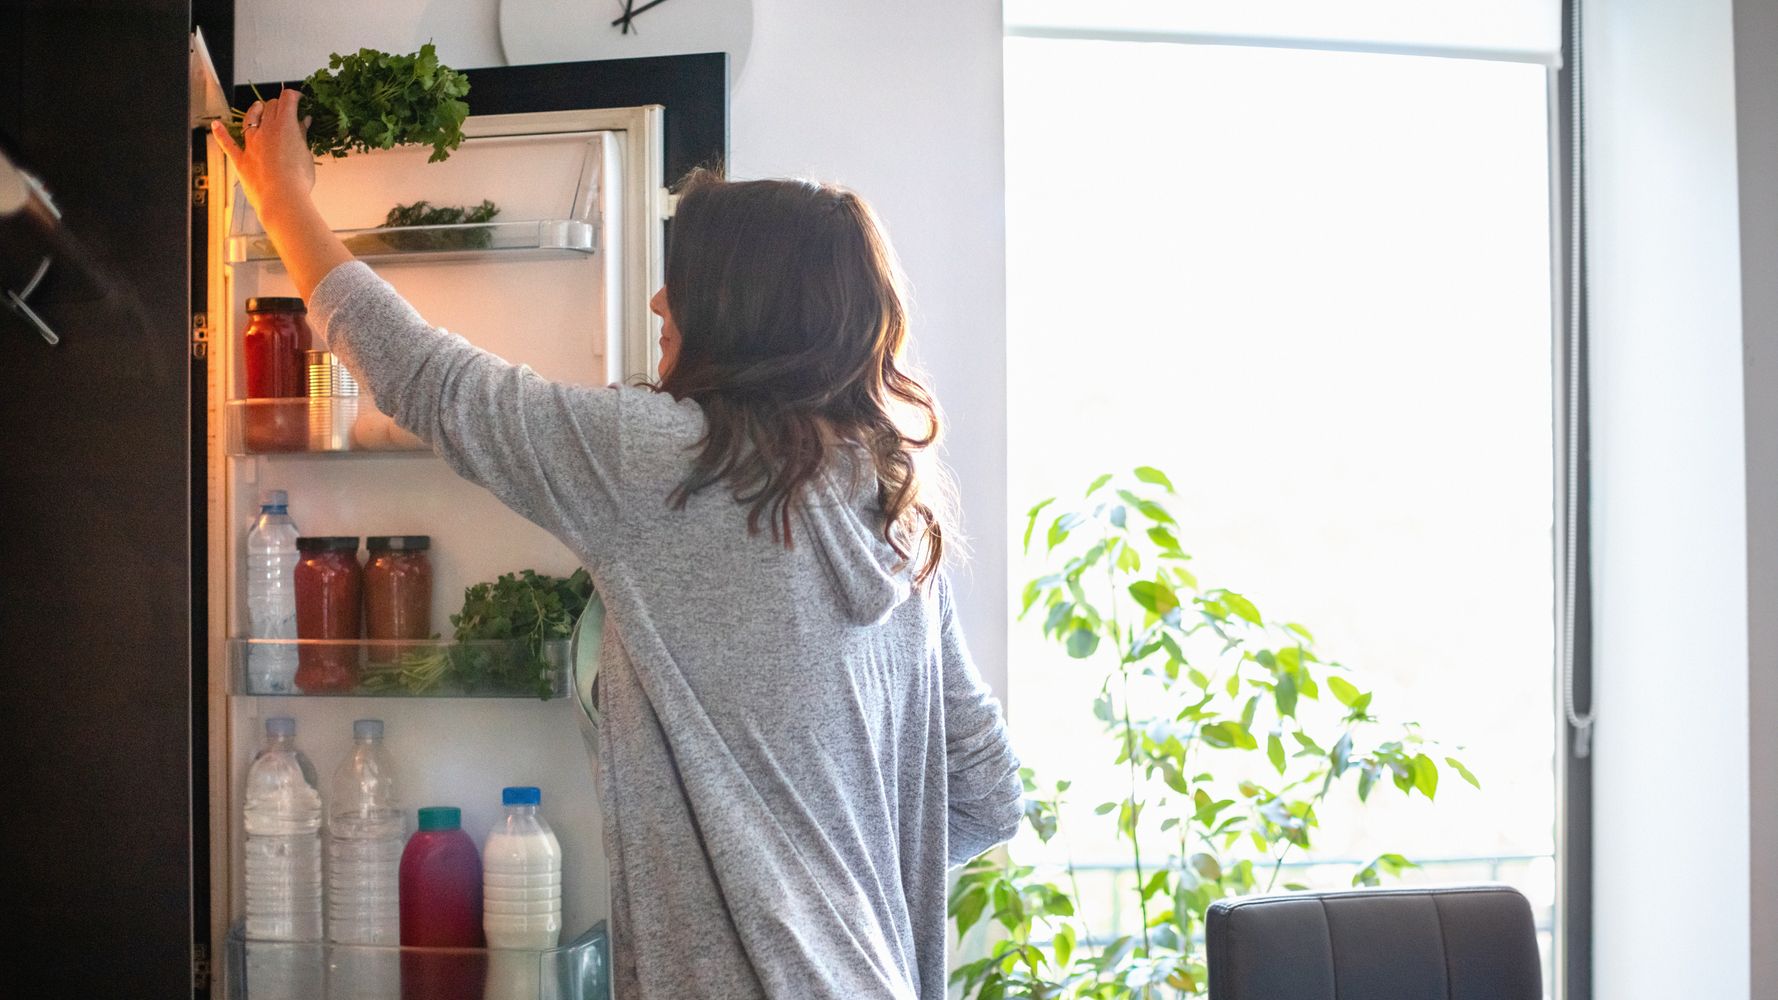 This Simple Fridge Hack Will Cut Down Your Grocery Bill And Food Waste